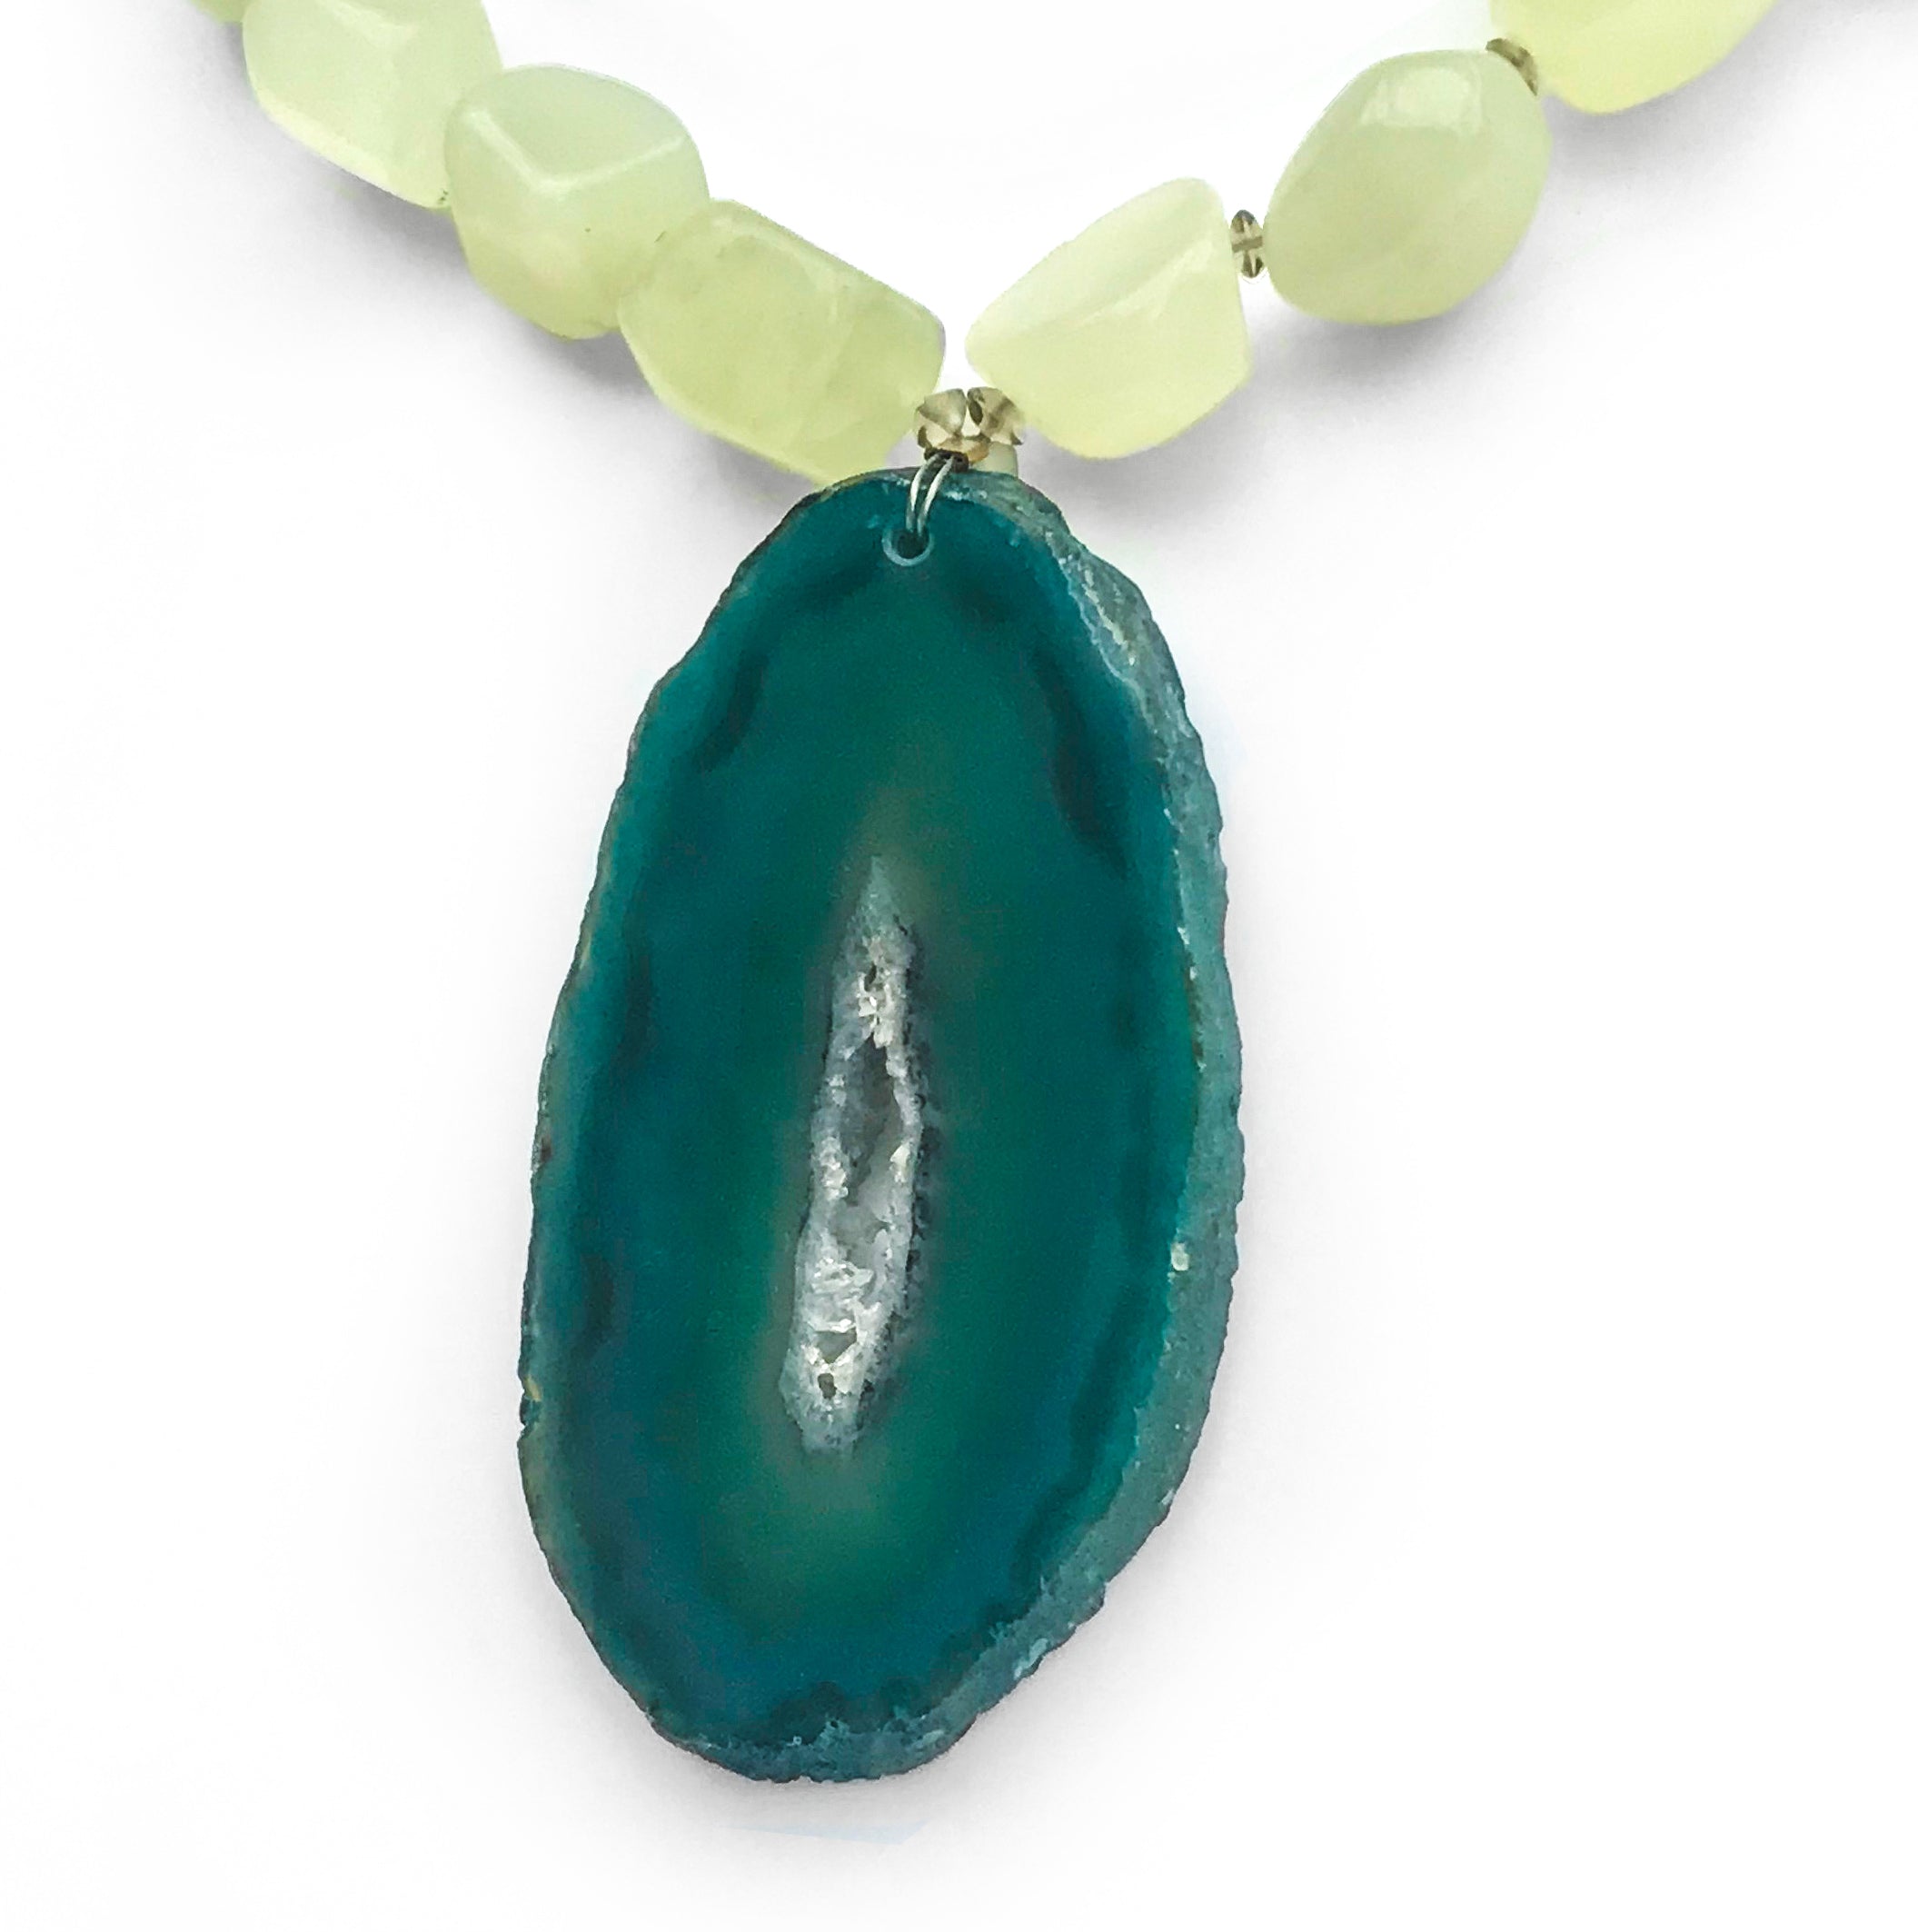 Vintage Green Agate Necklace. Find this and other Vintage jewellery for sale at Intovintage.co.uk. Into Vintage